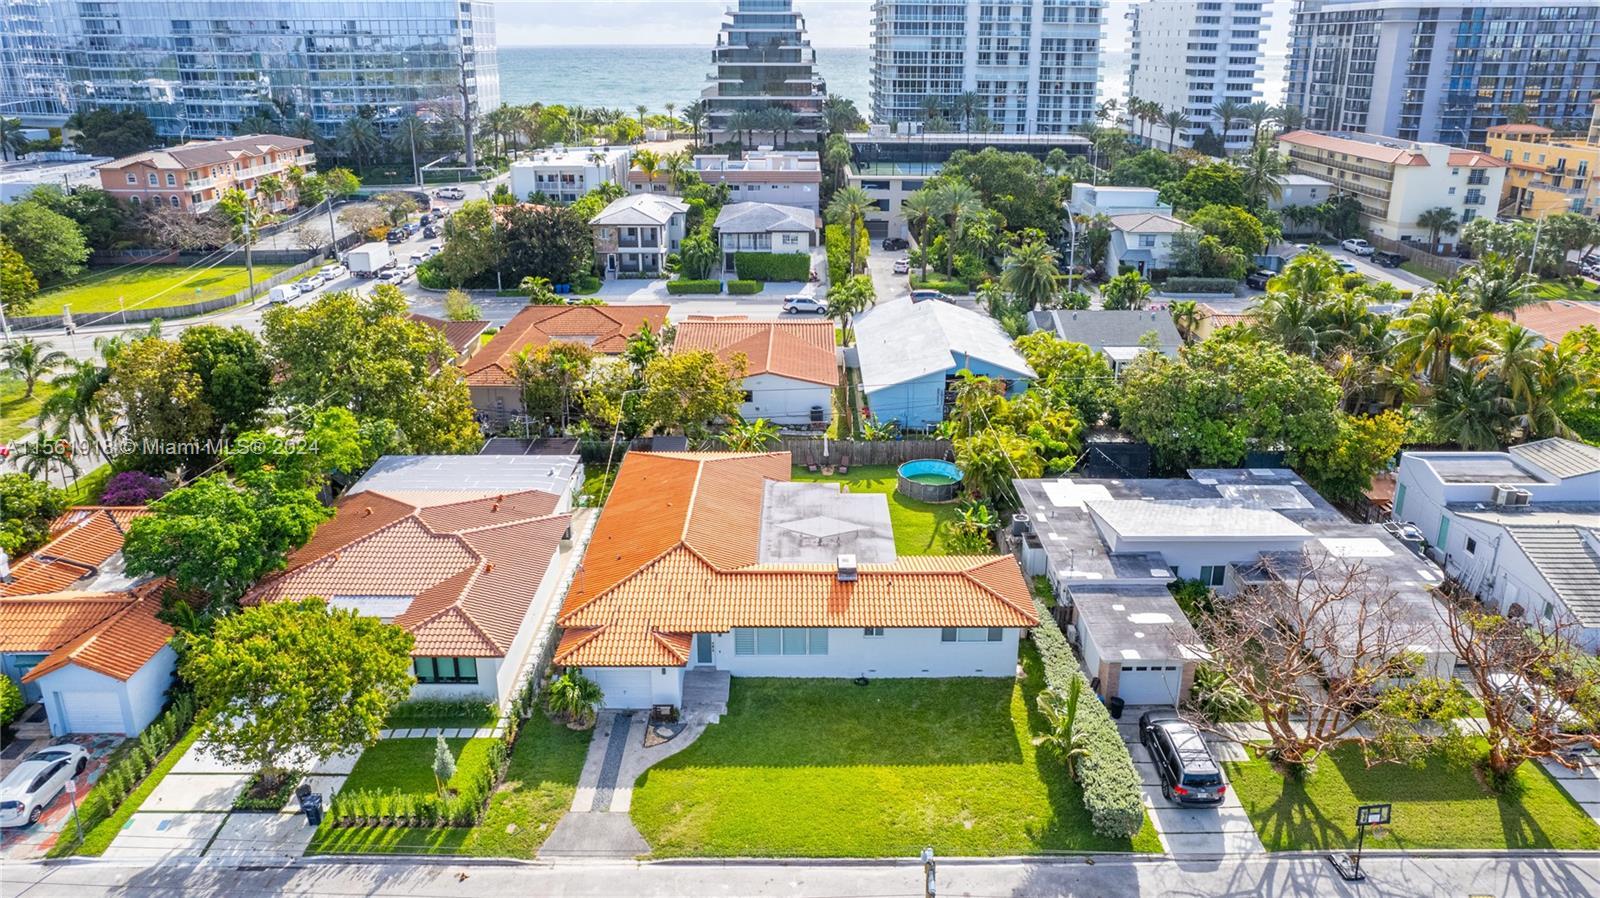 Prime location in Surfside with close proximity to stunning beaches, Bal Harbour shops, and places o